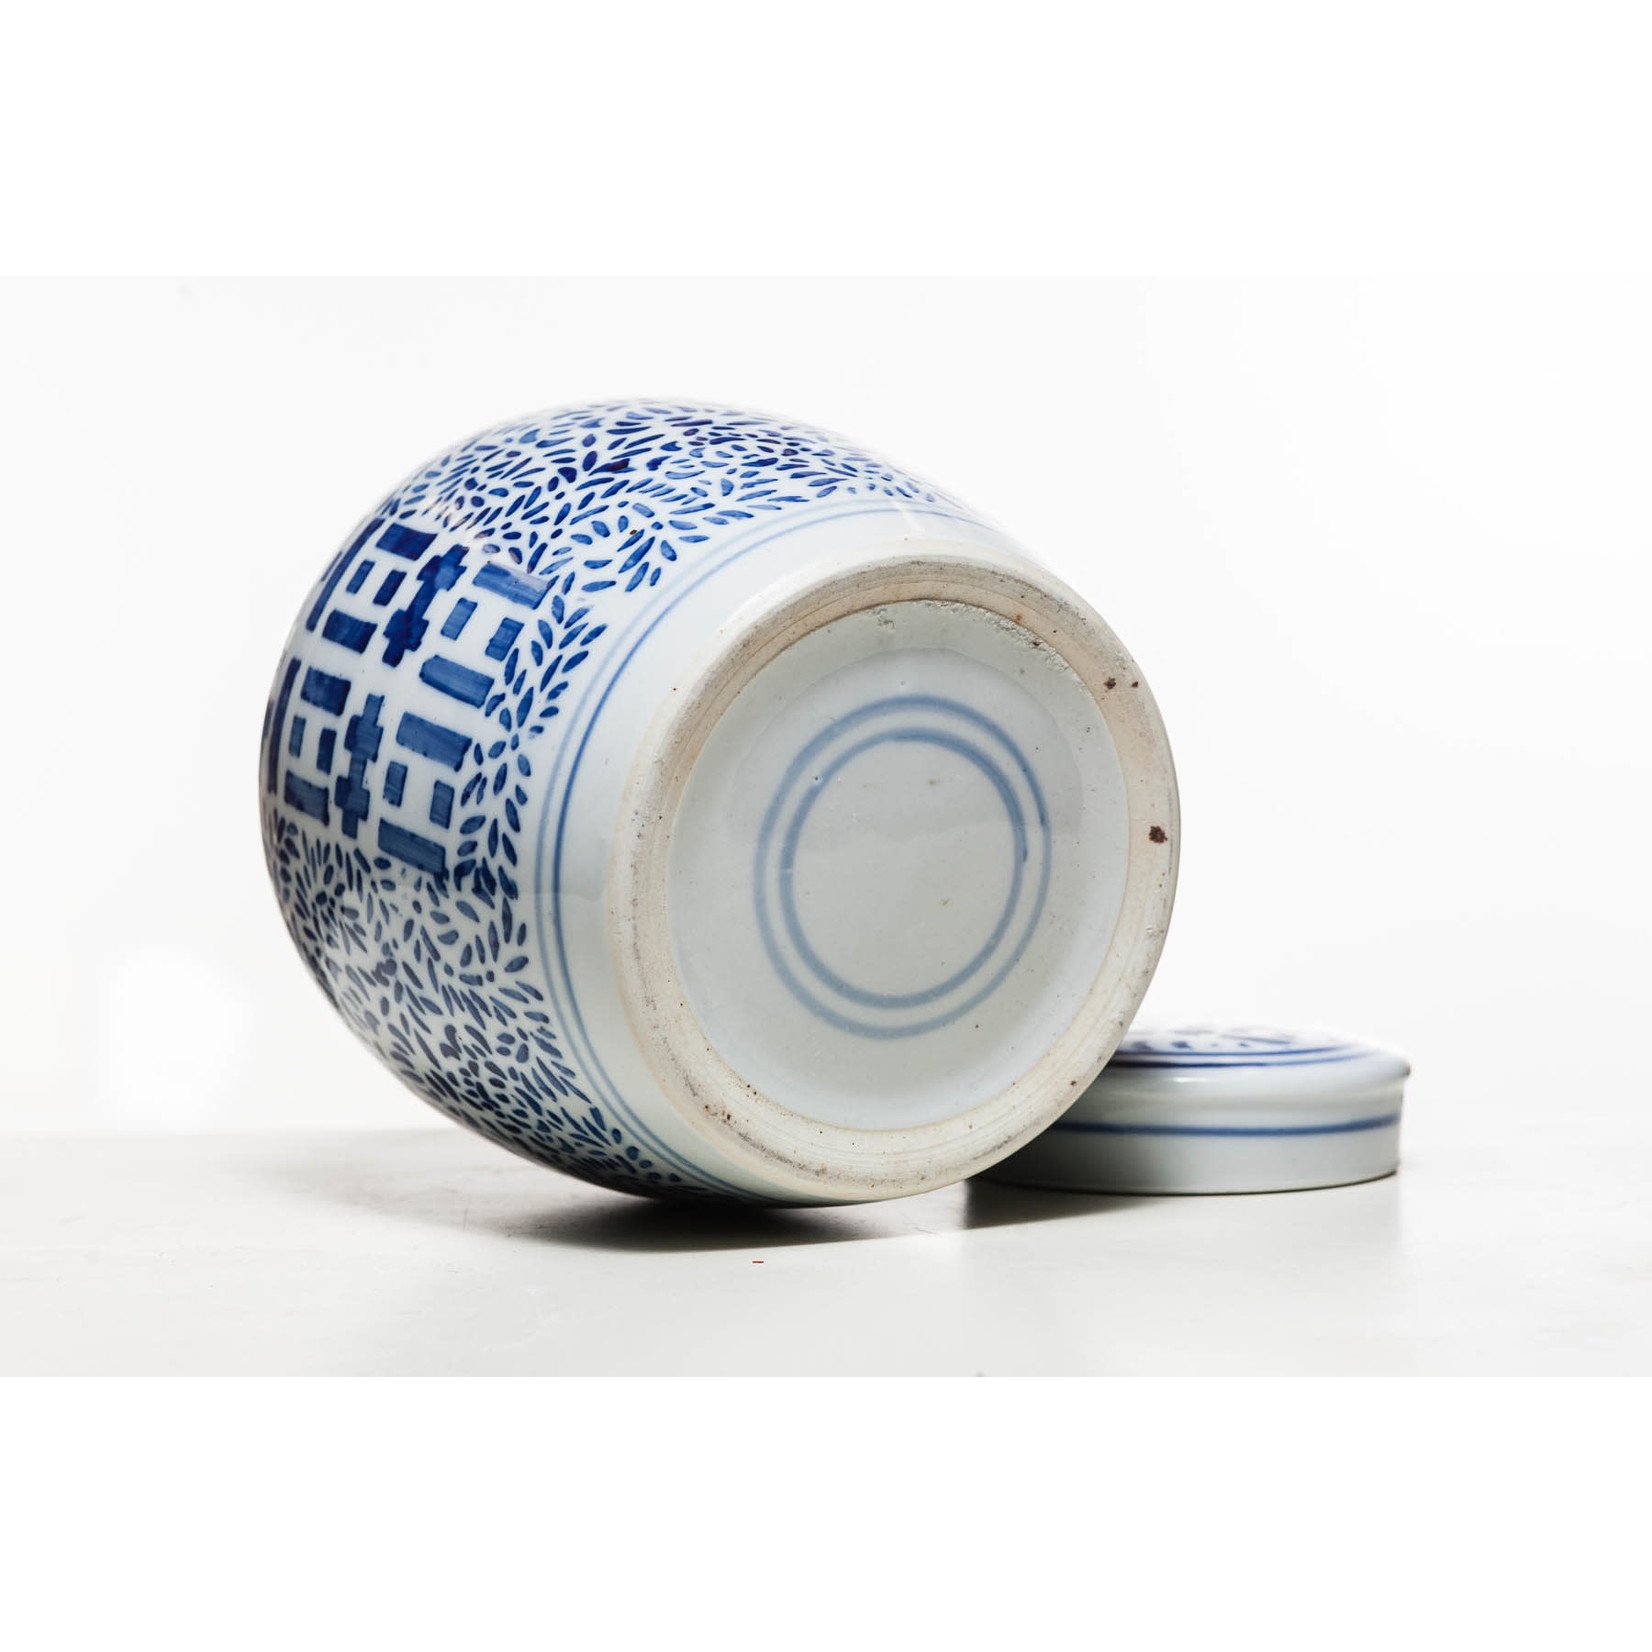 Lawrence Collection 20th Century Chinese Double Happiness Blue & White Porcelain Ginger Jar